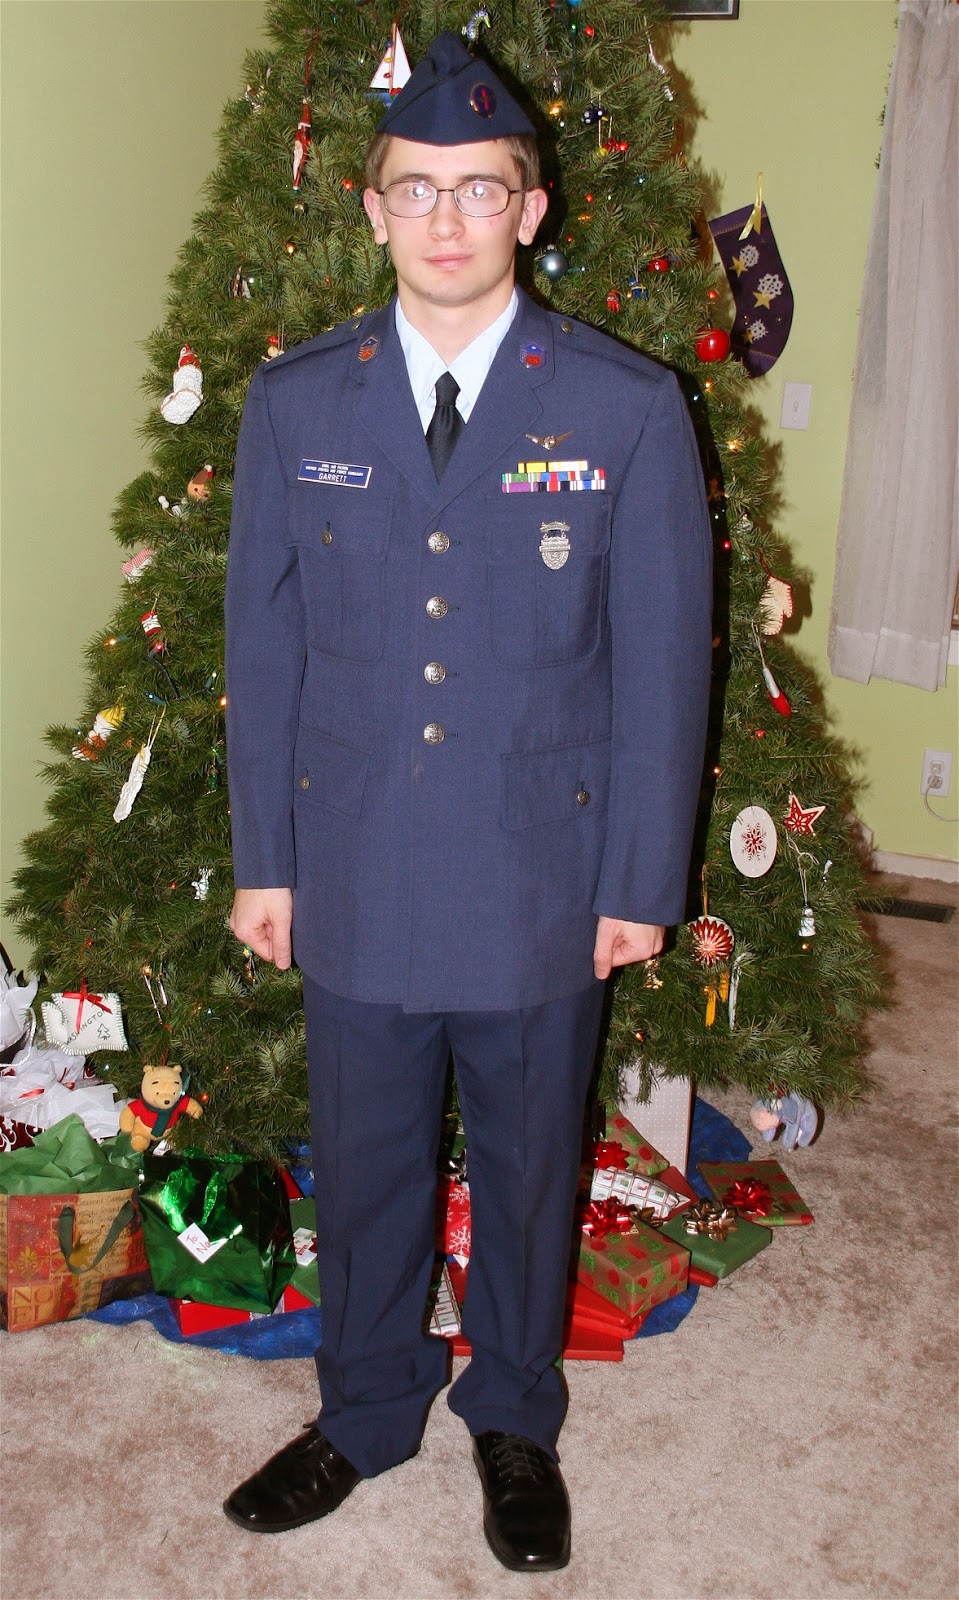 Air Force Dress Uniform 2013 (wisely) to go in uniform.